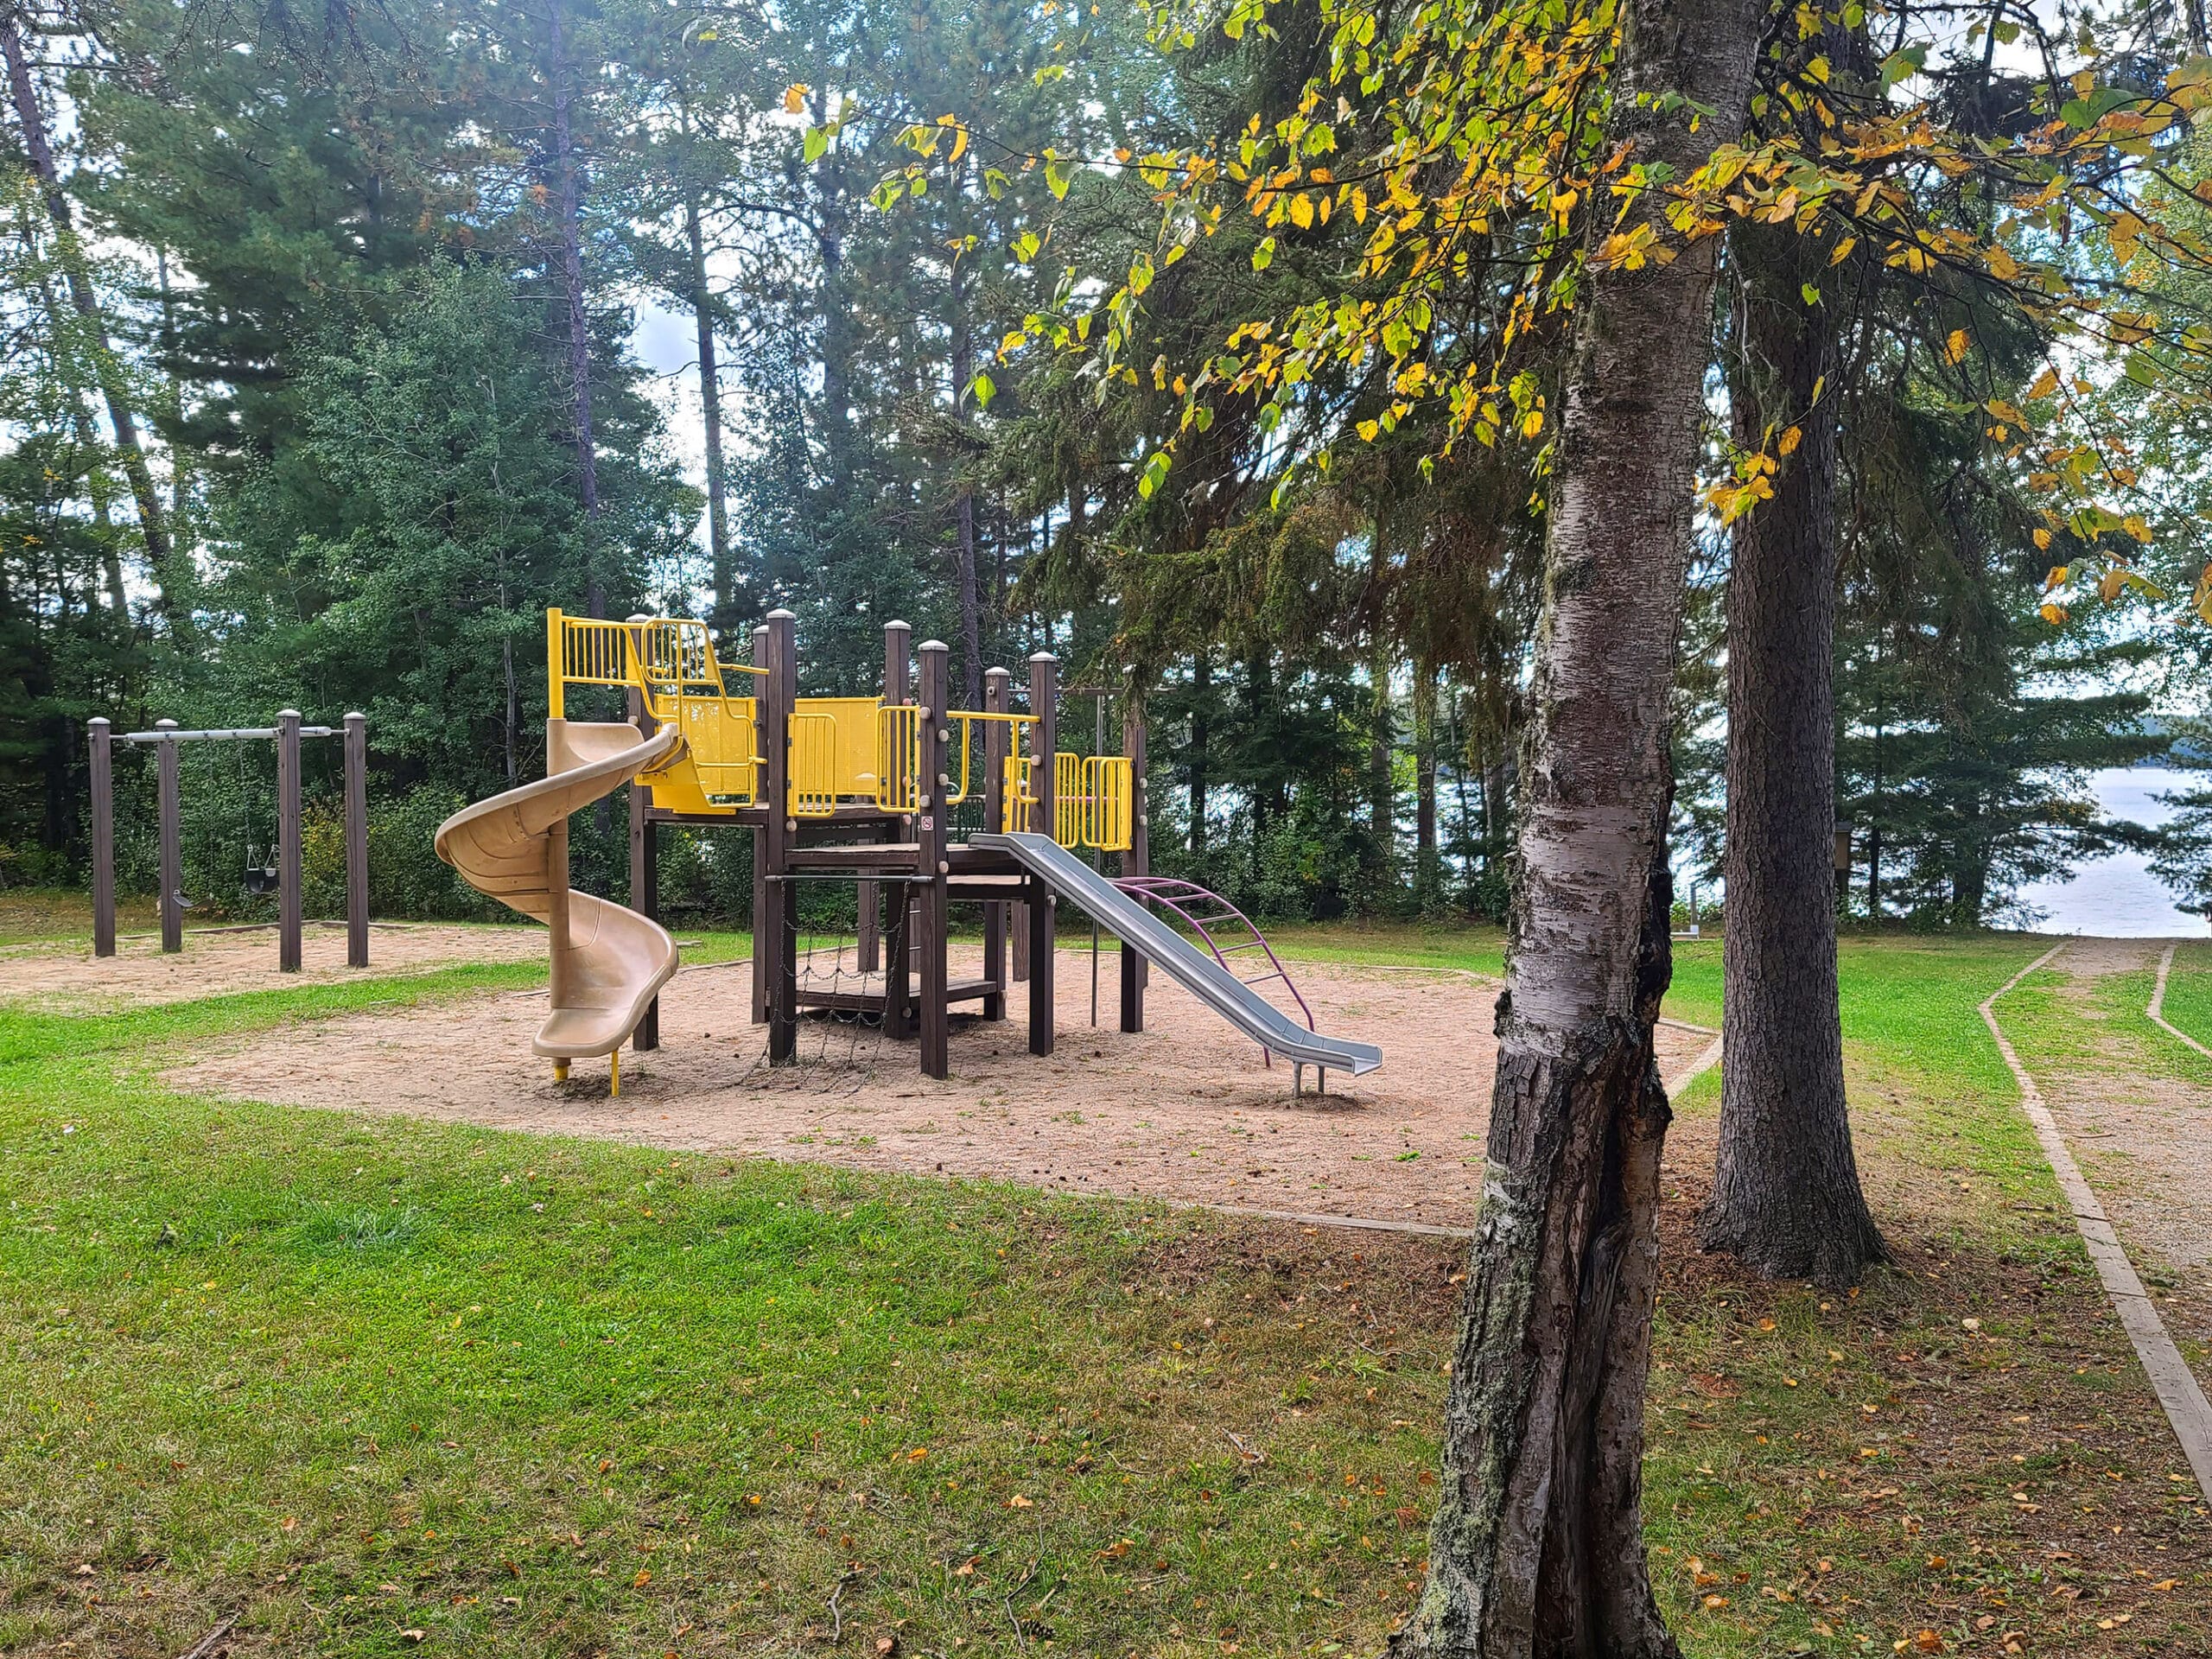 A large play ground structure in the woods.